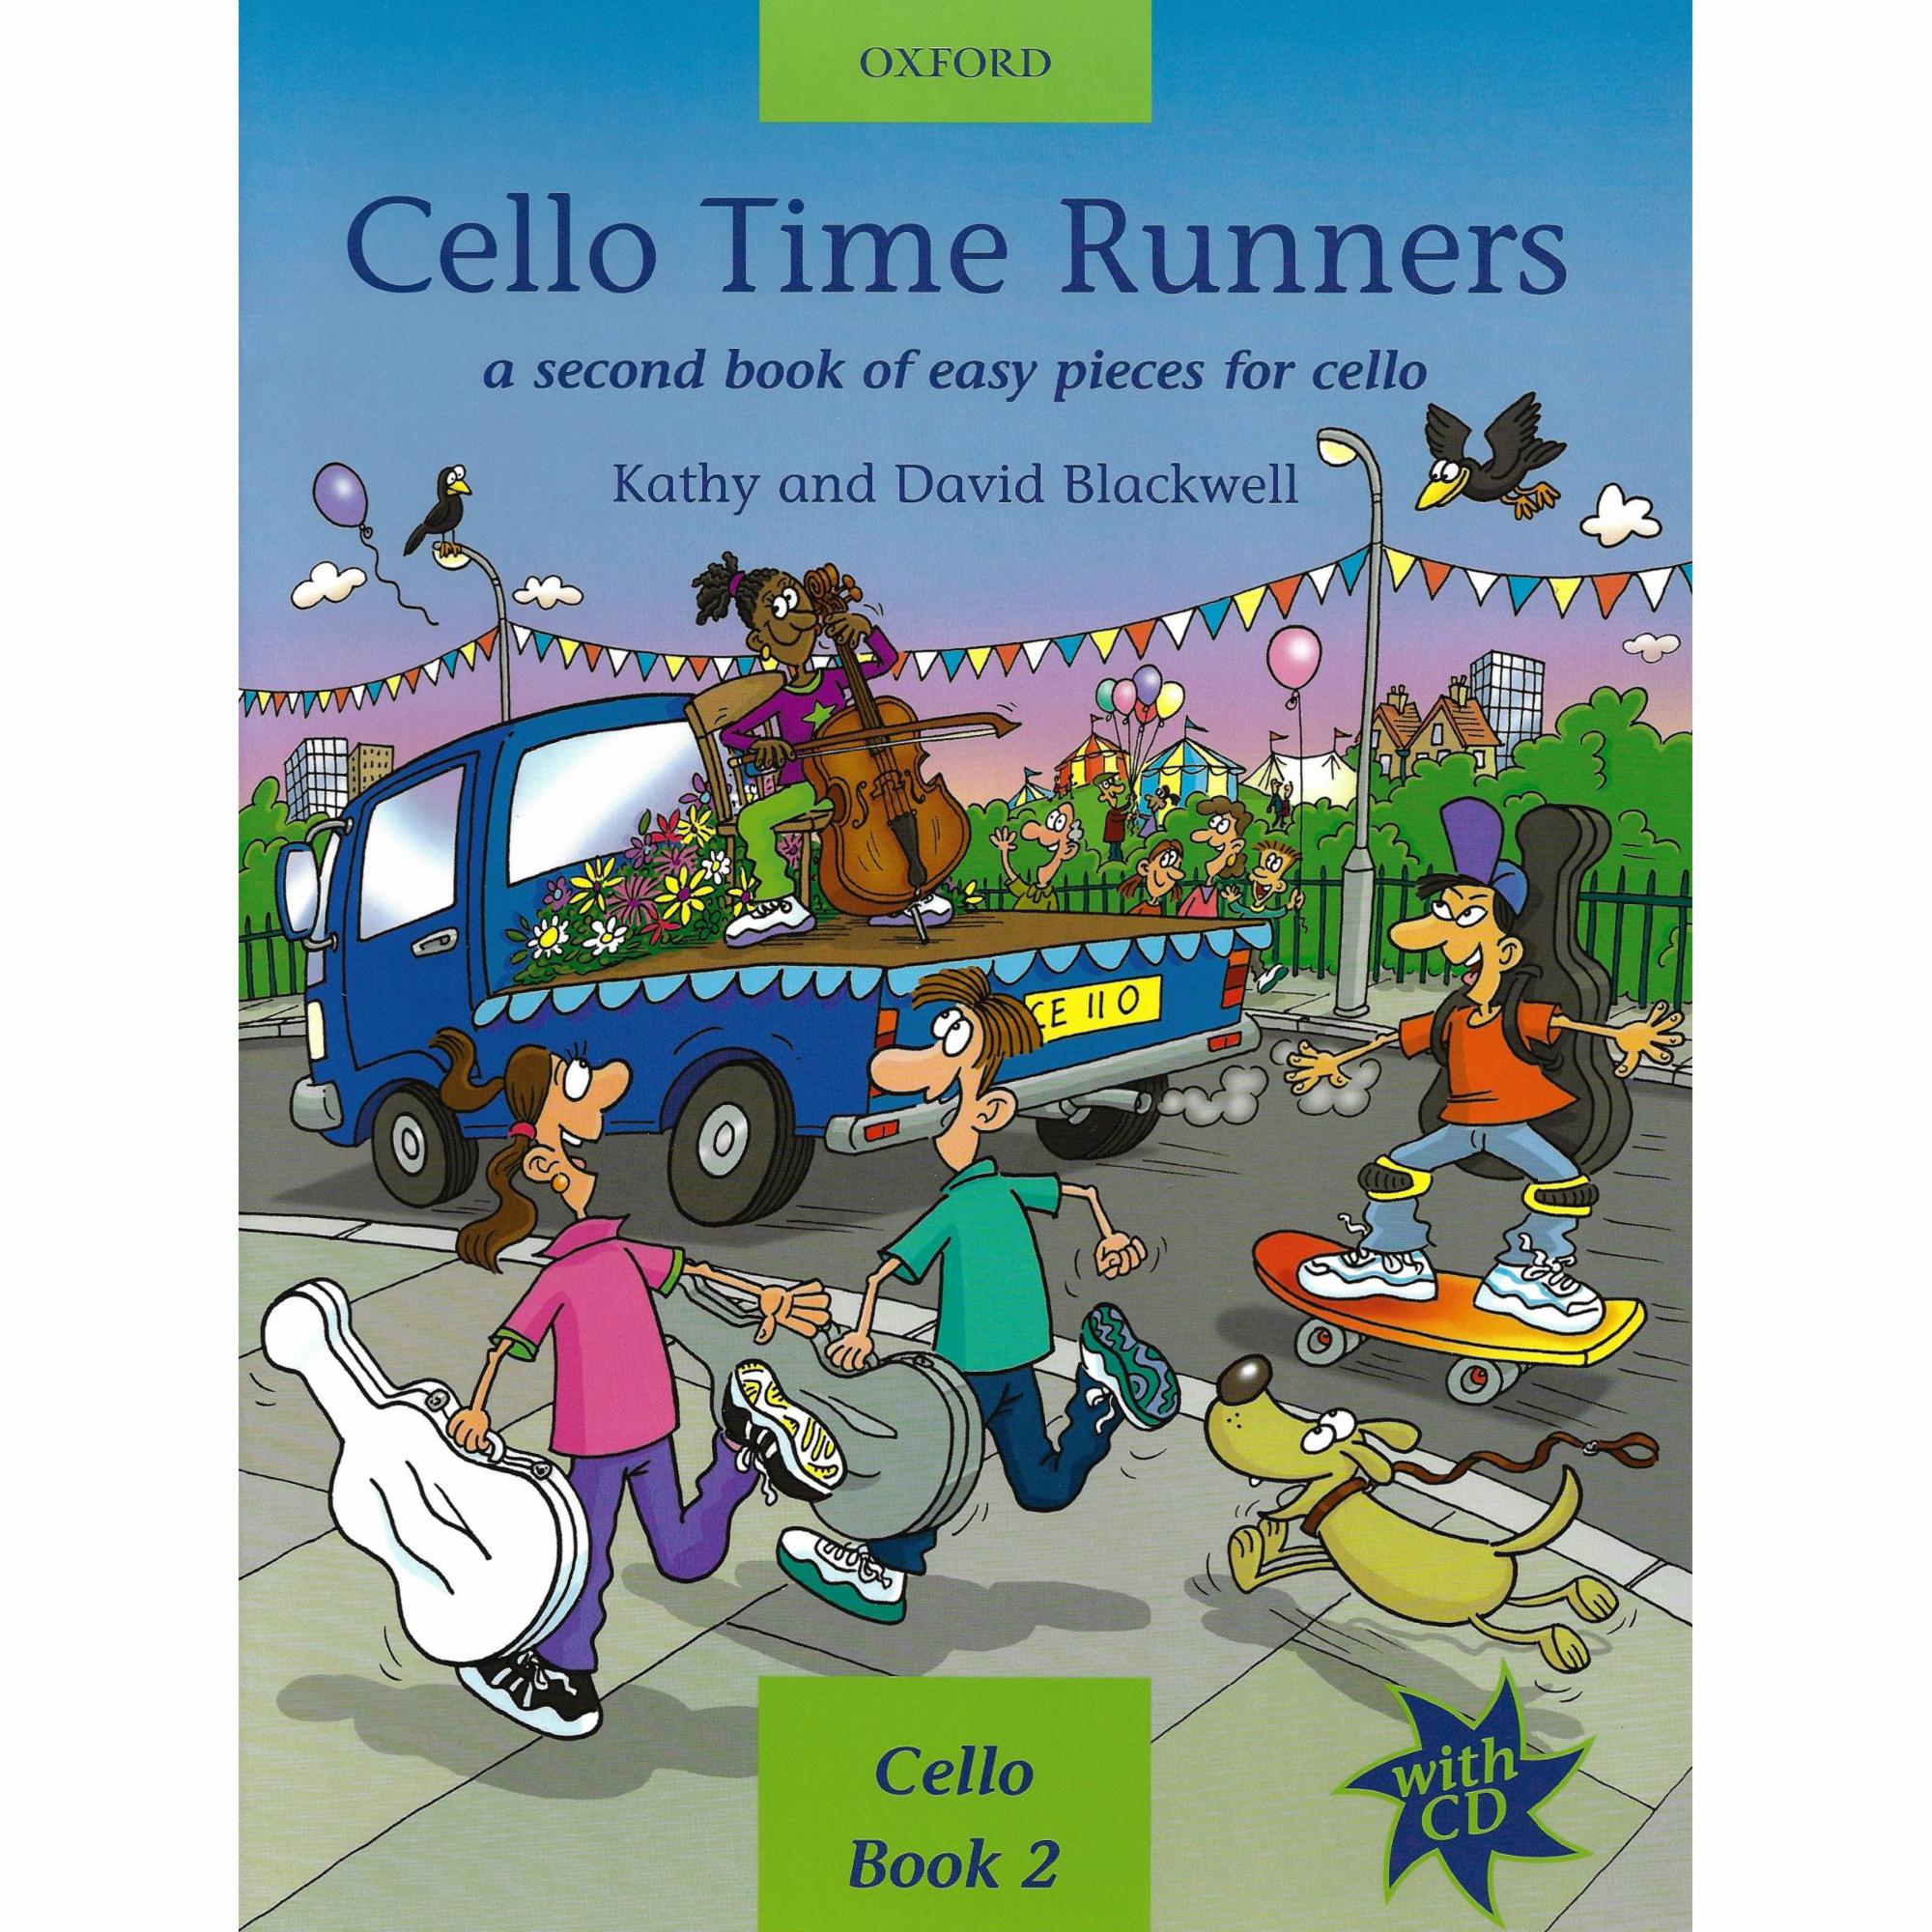 Cello Time Runners